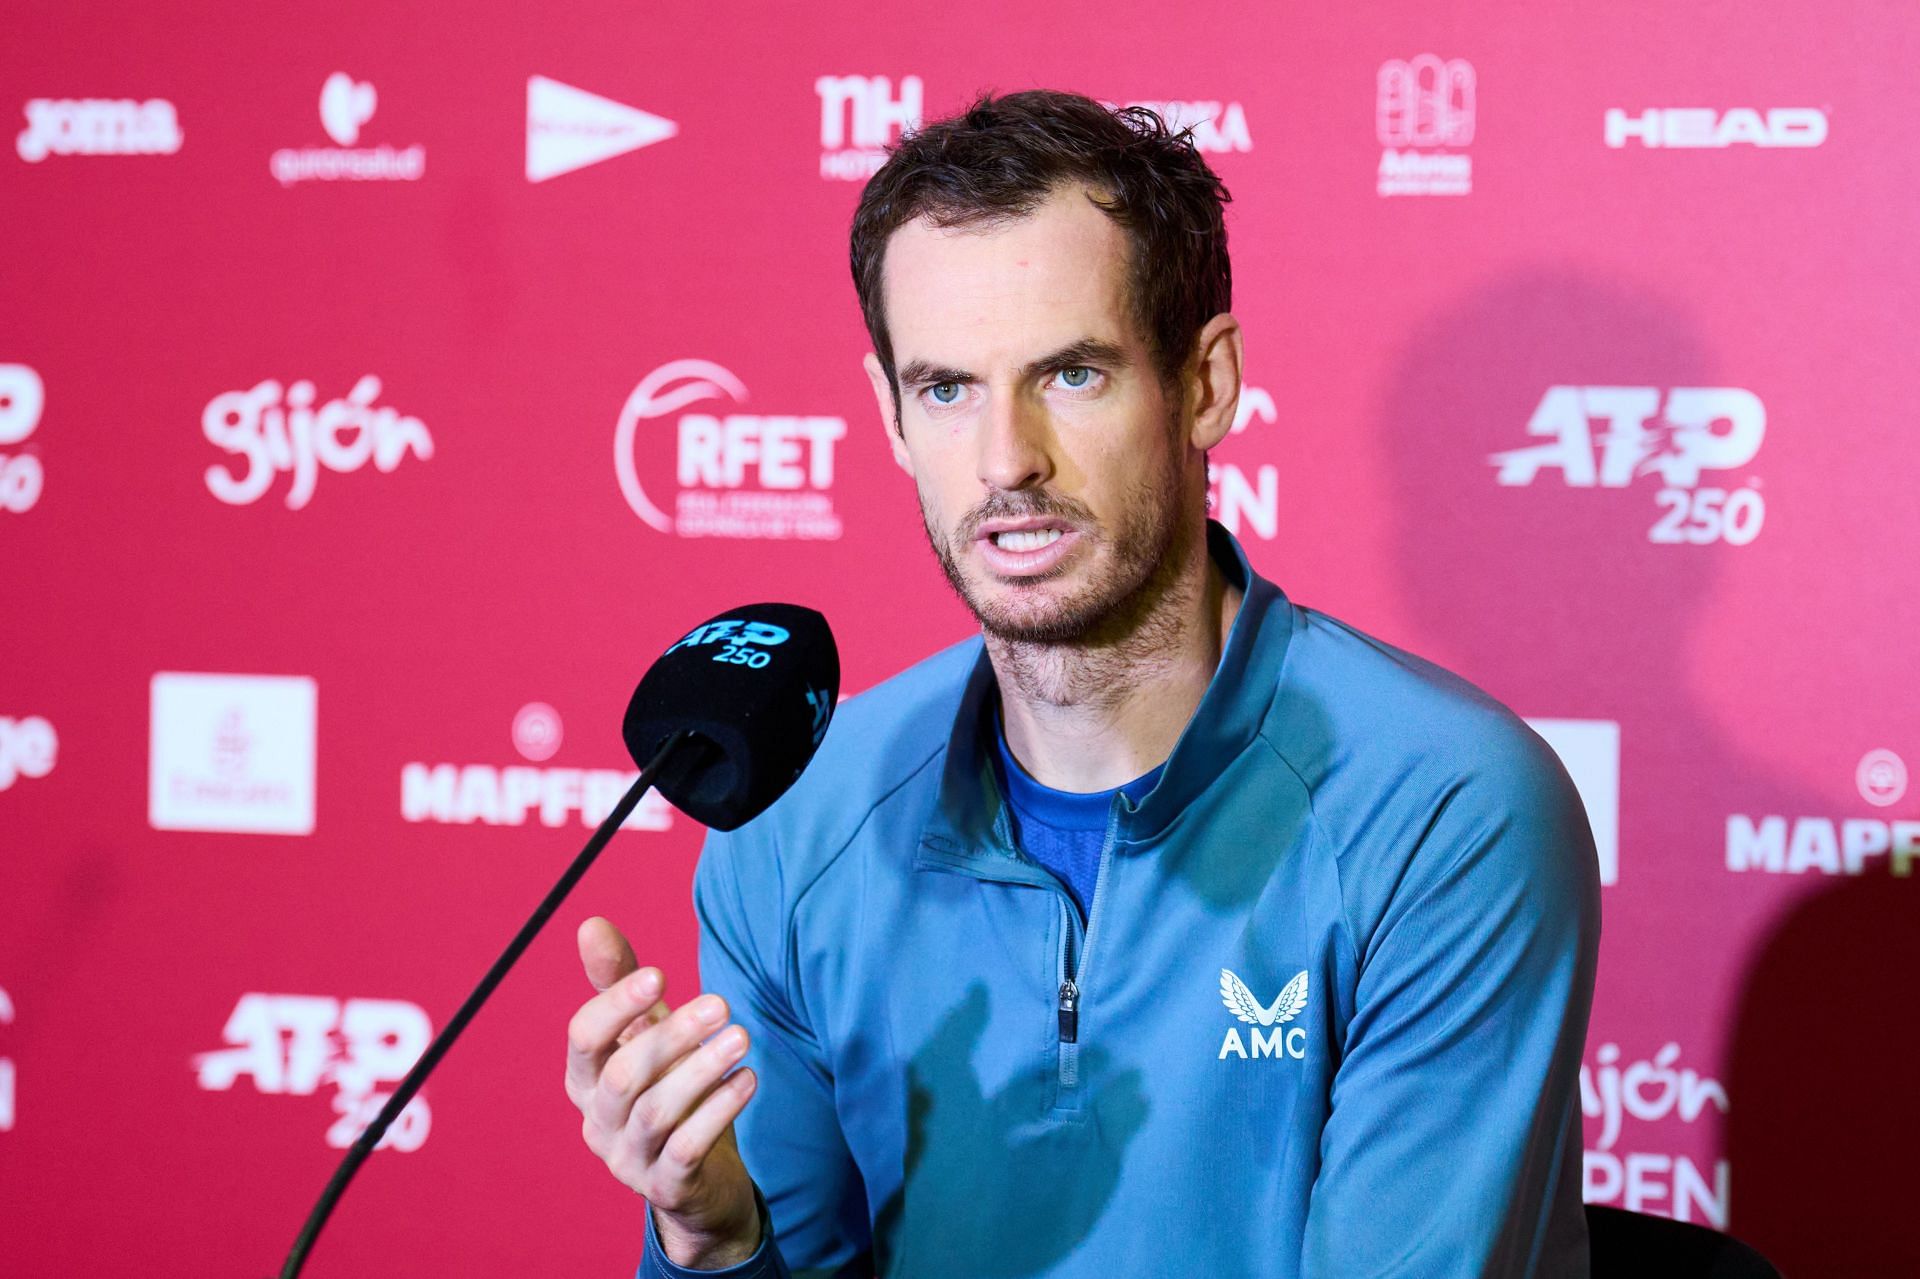 Andy Murray at the 2022 Gijon Open